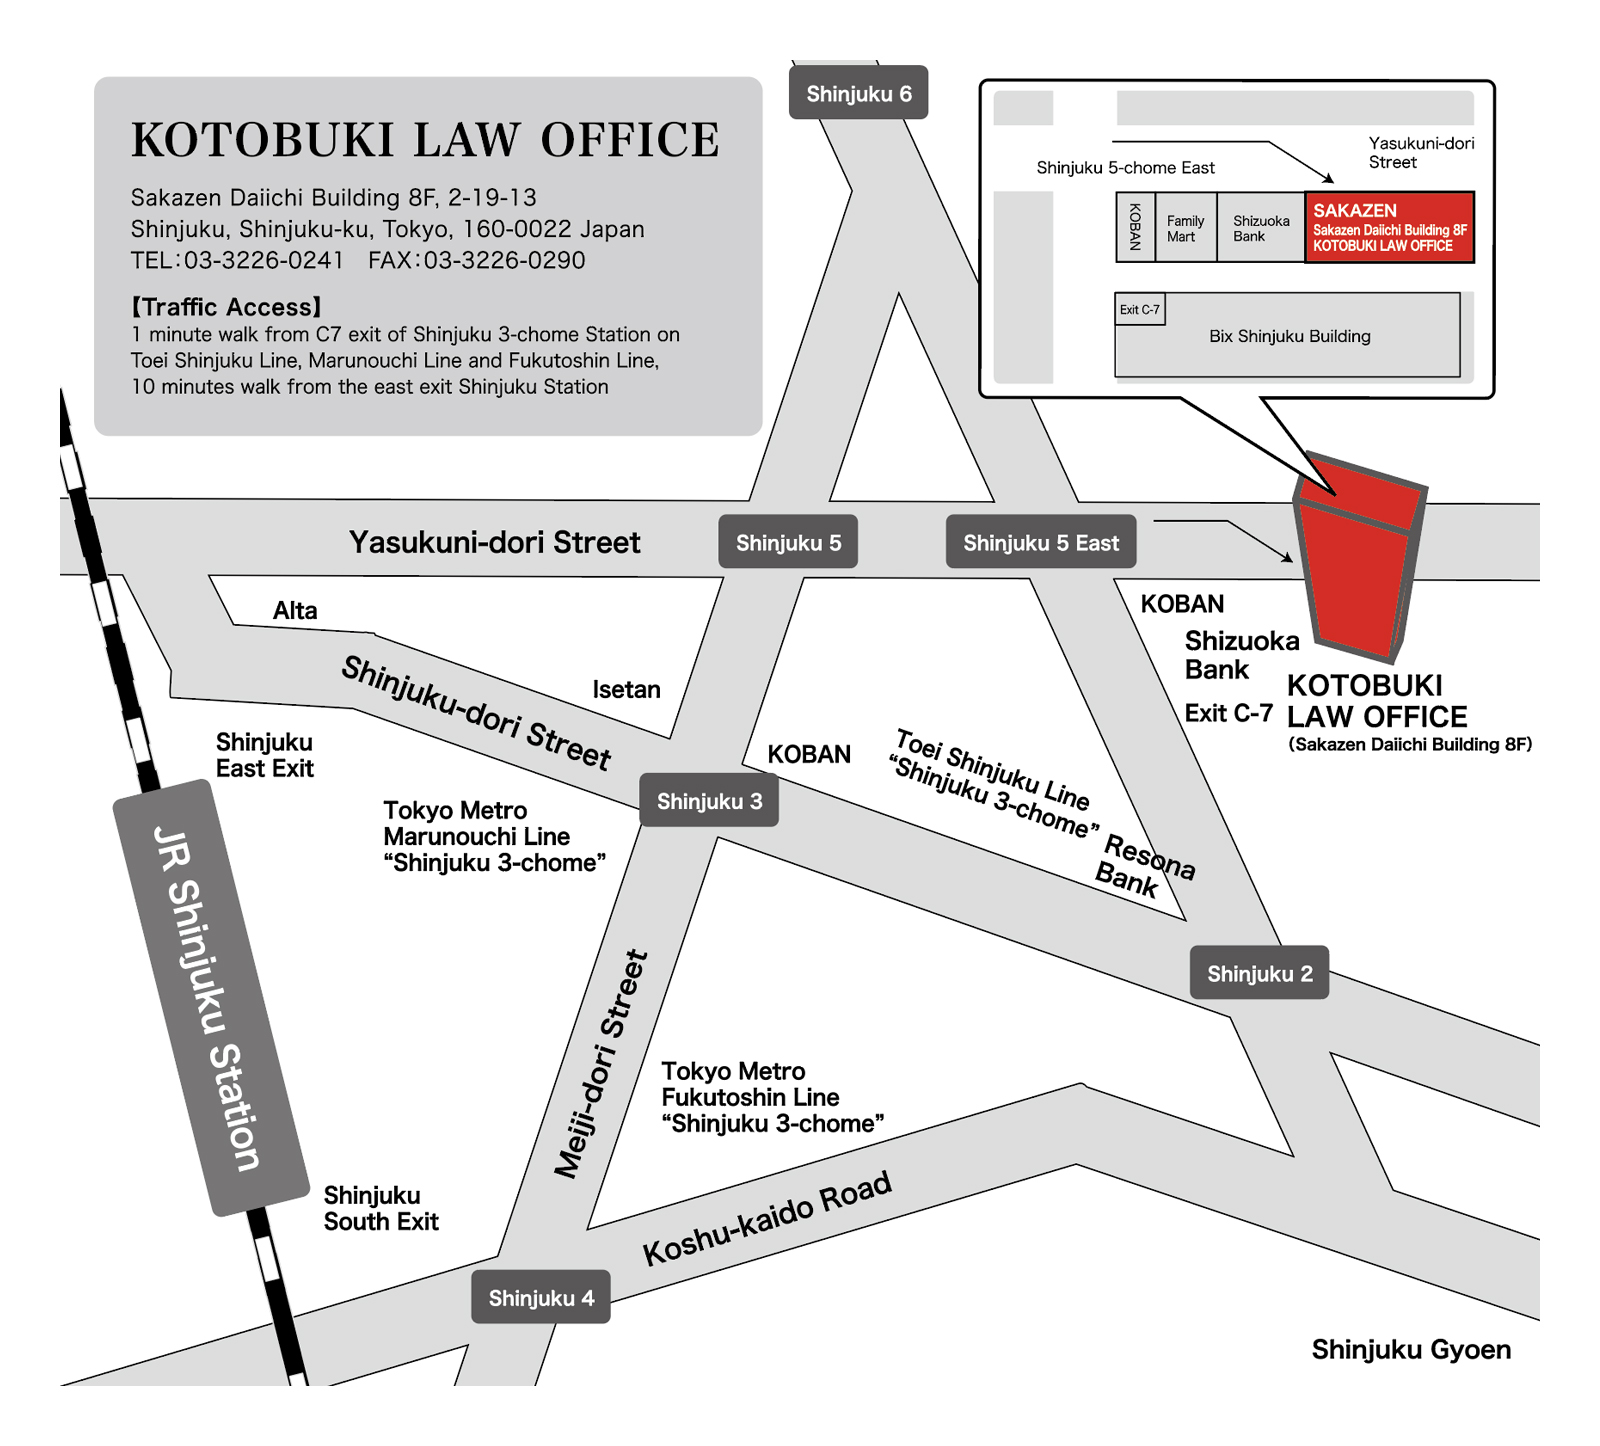 Office map